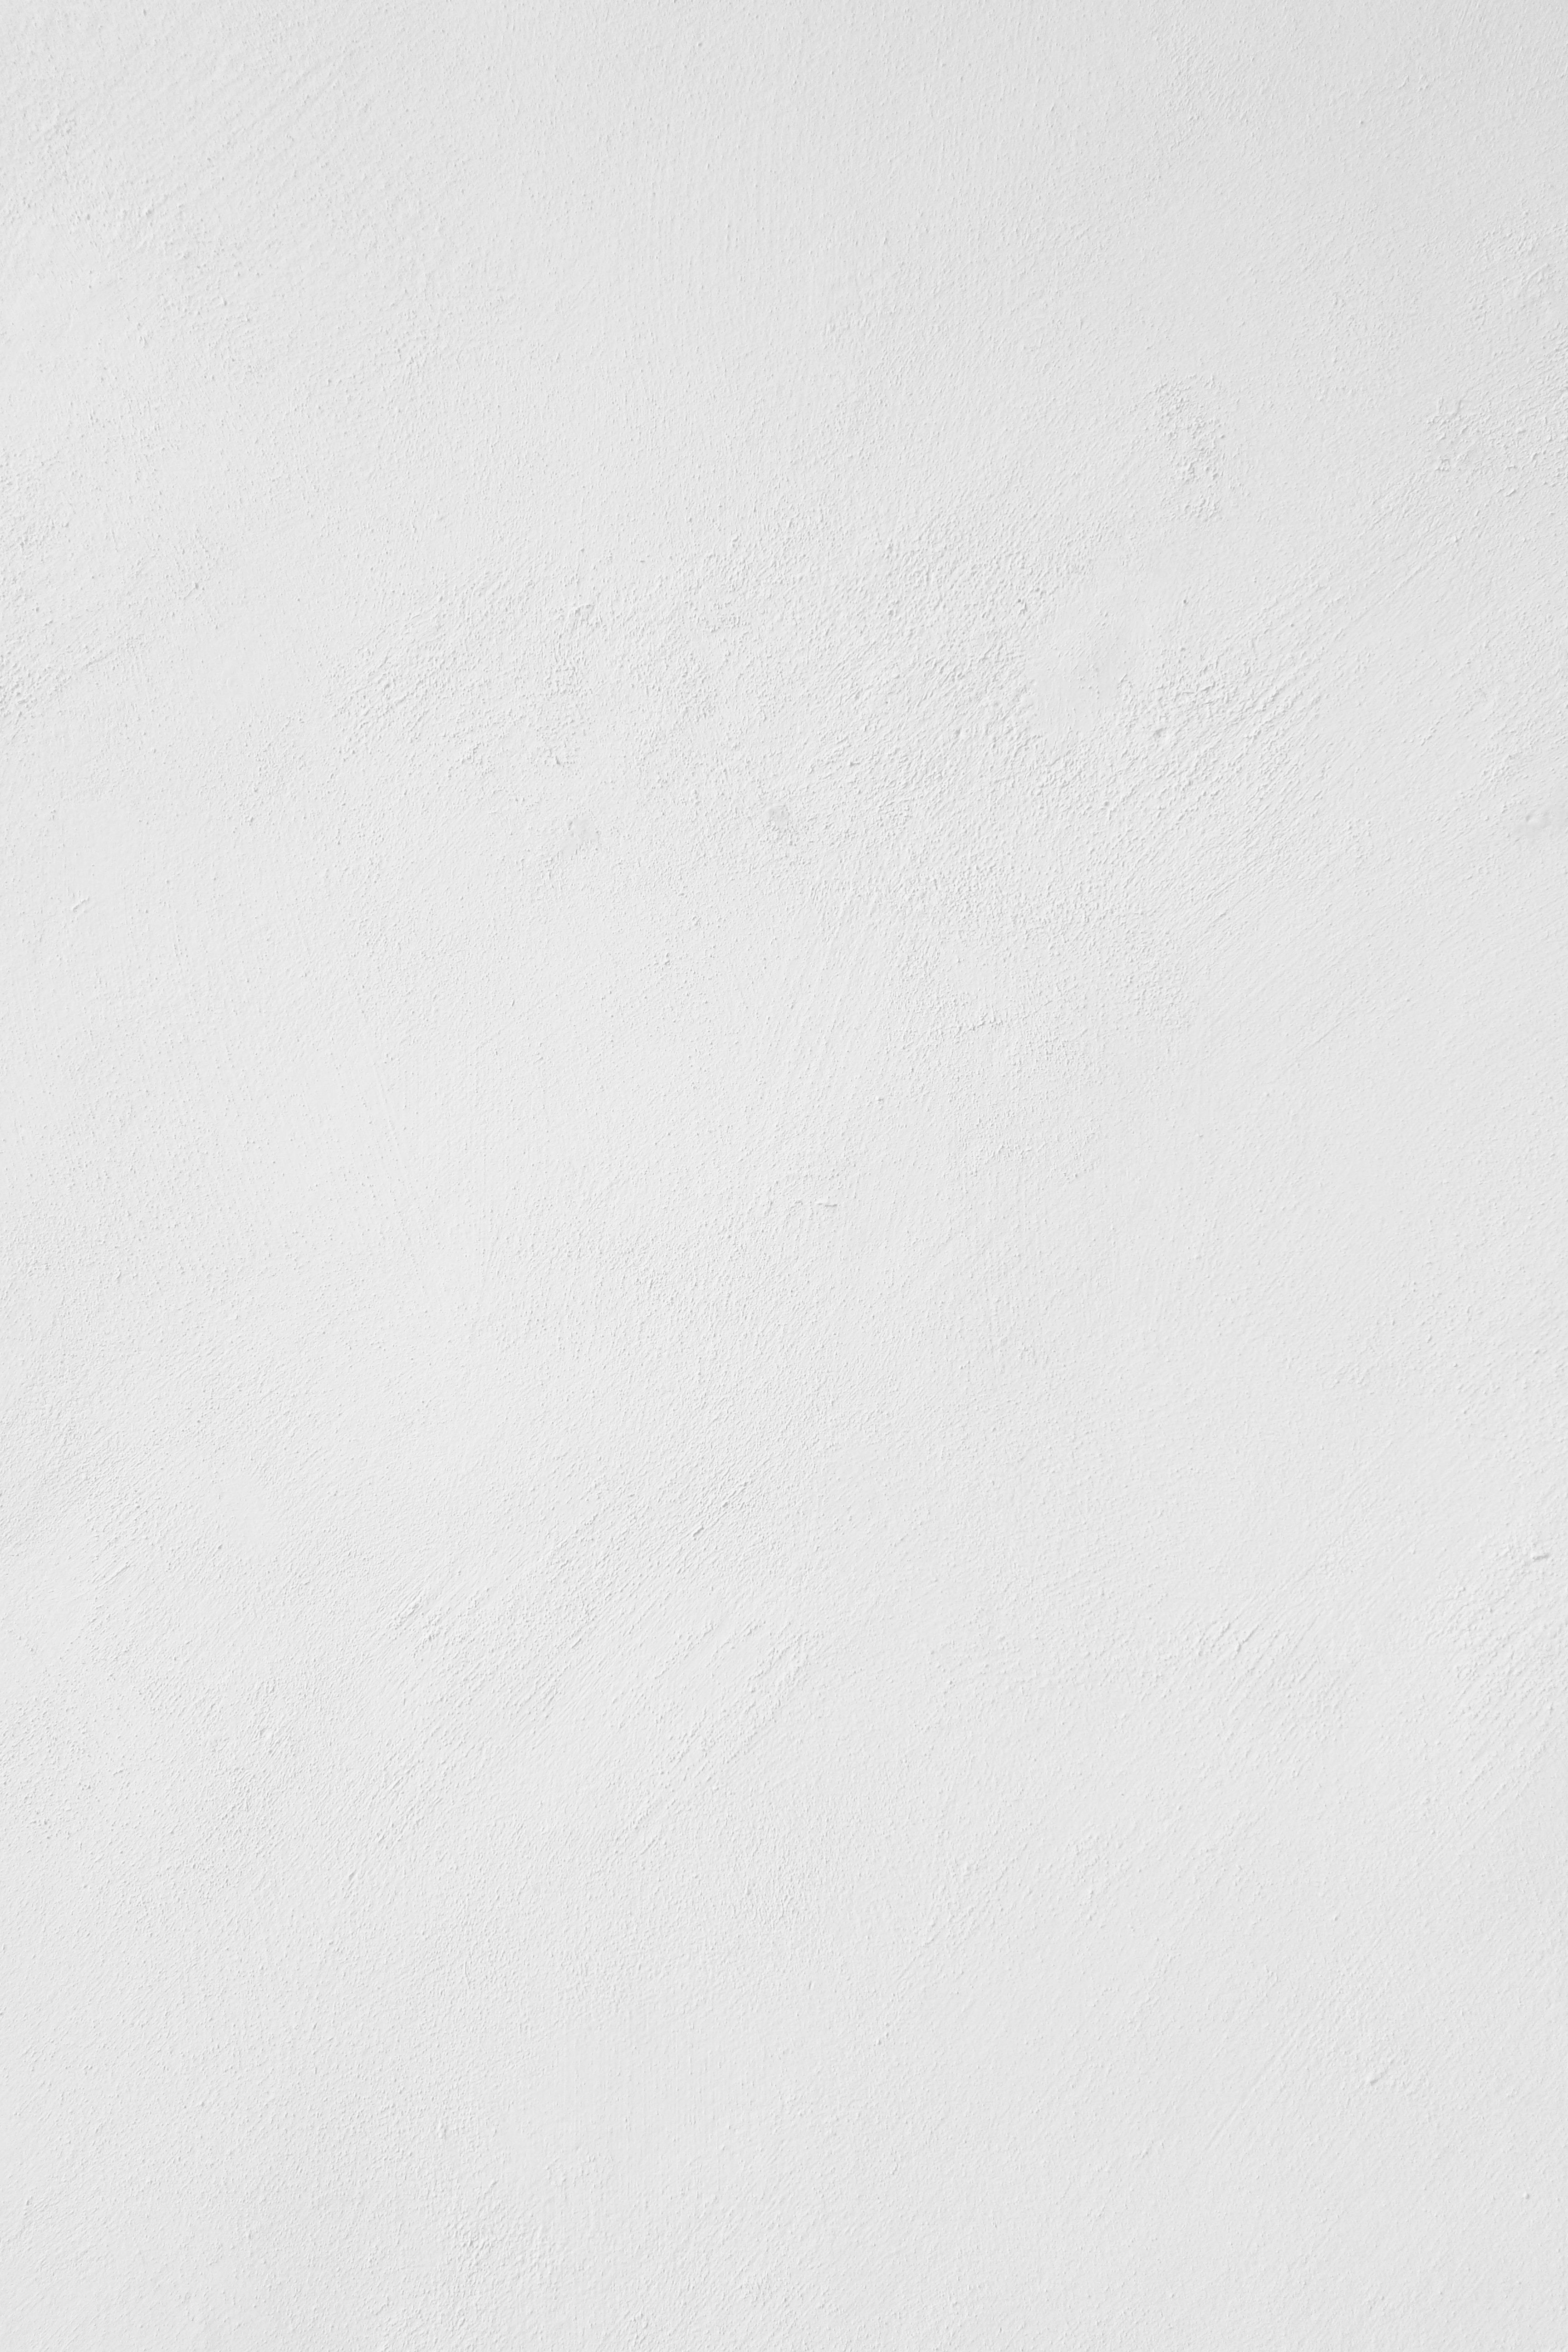 84666 Screensavers and Wallpapers Plain for phone. Download monochromatic, plain, textures, texture, wall, grey pictures for free